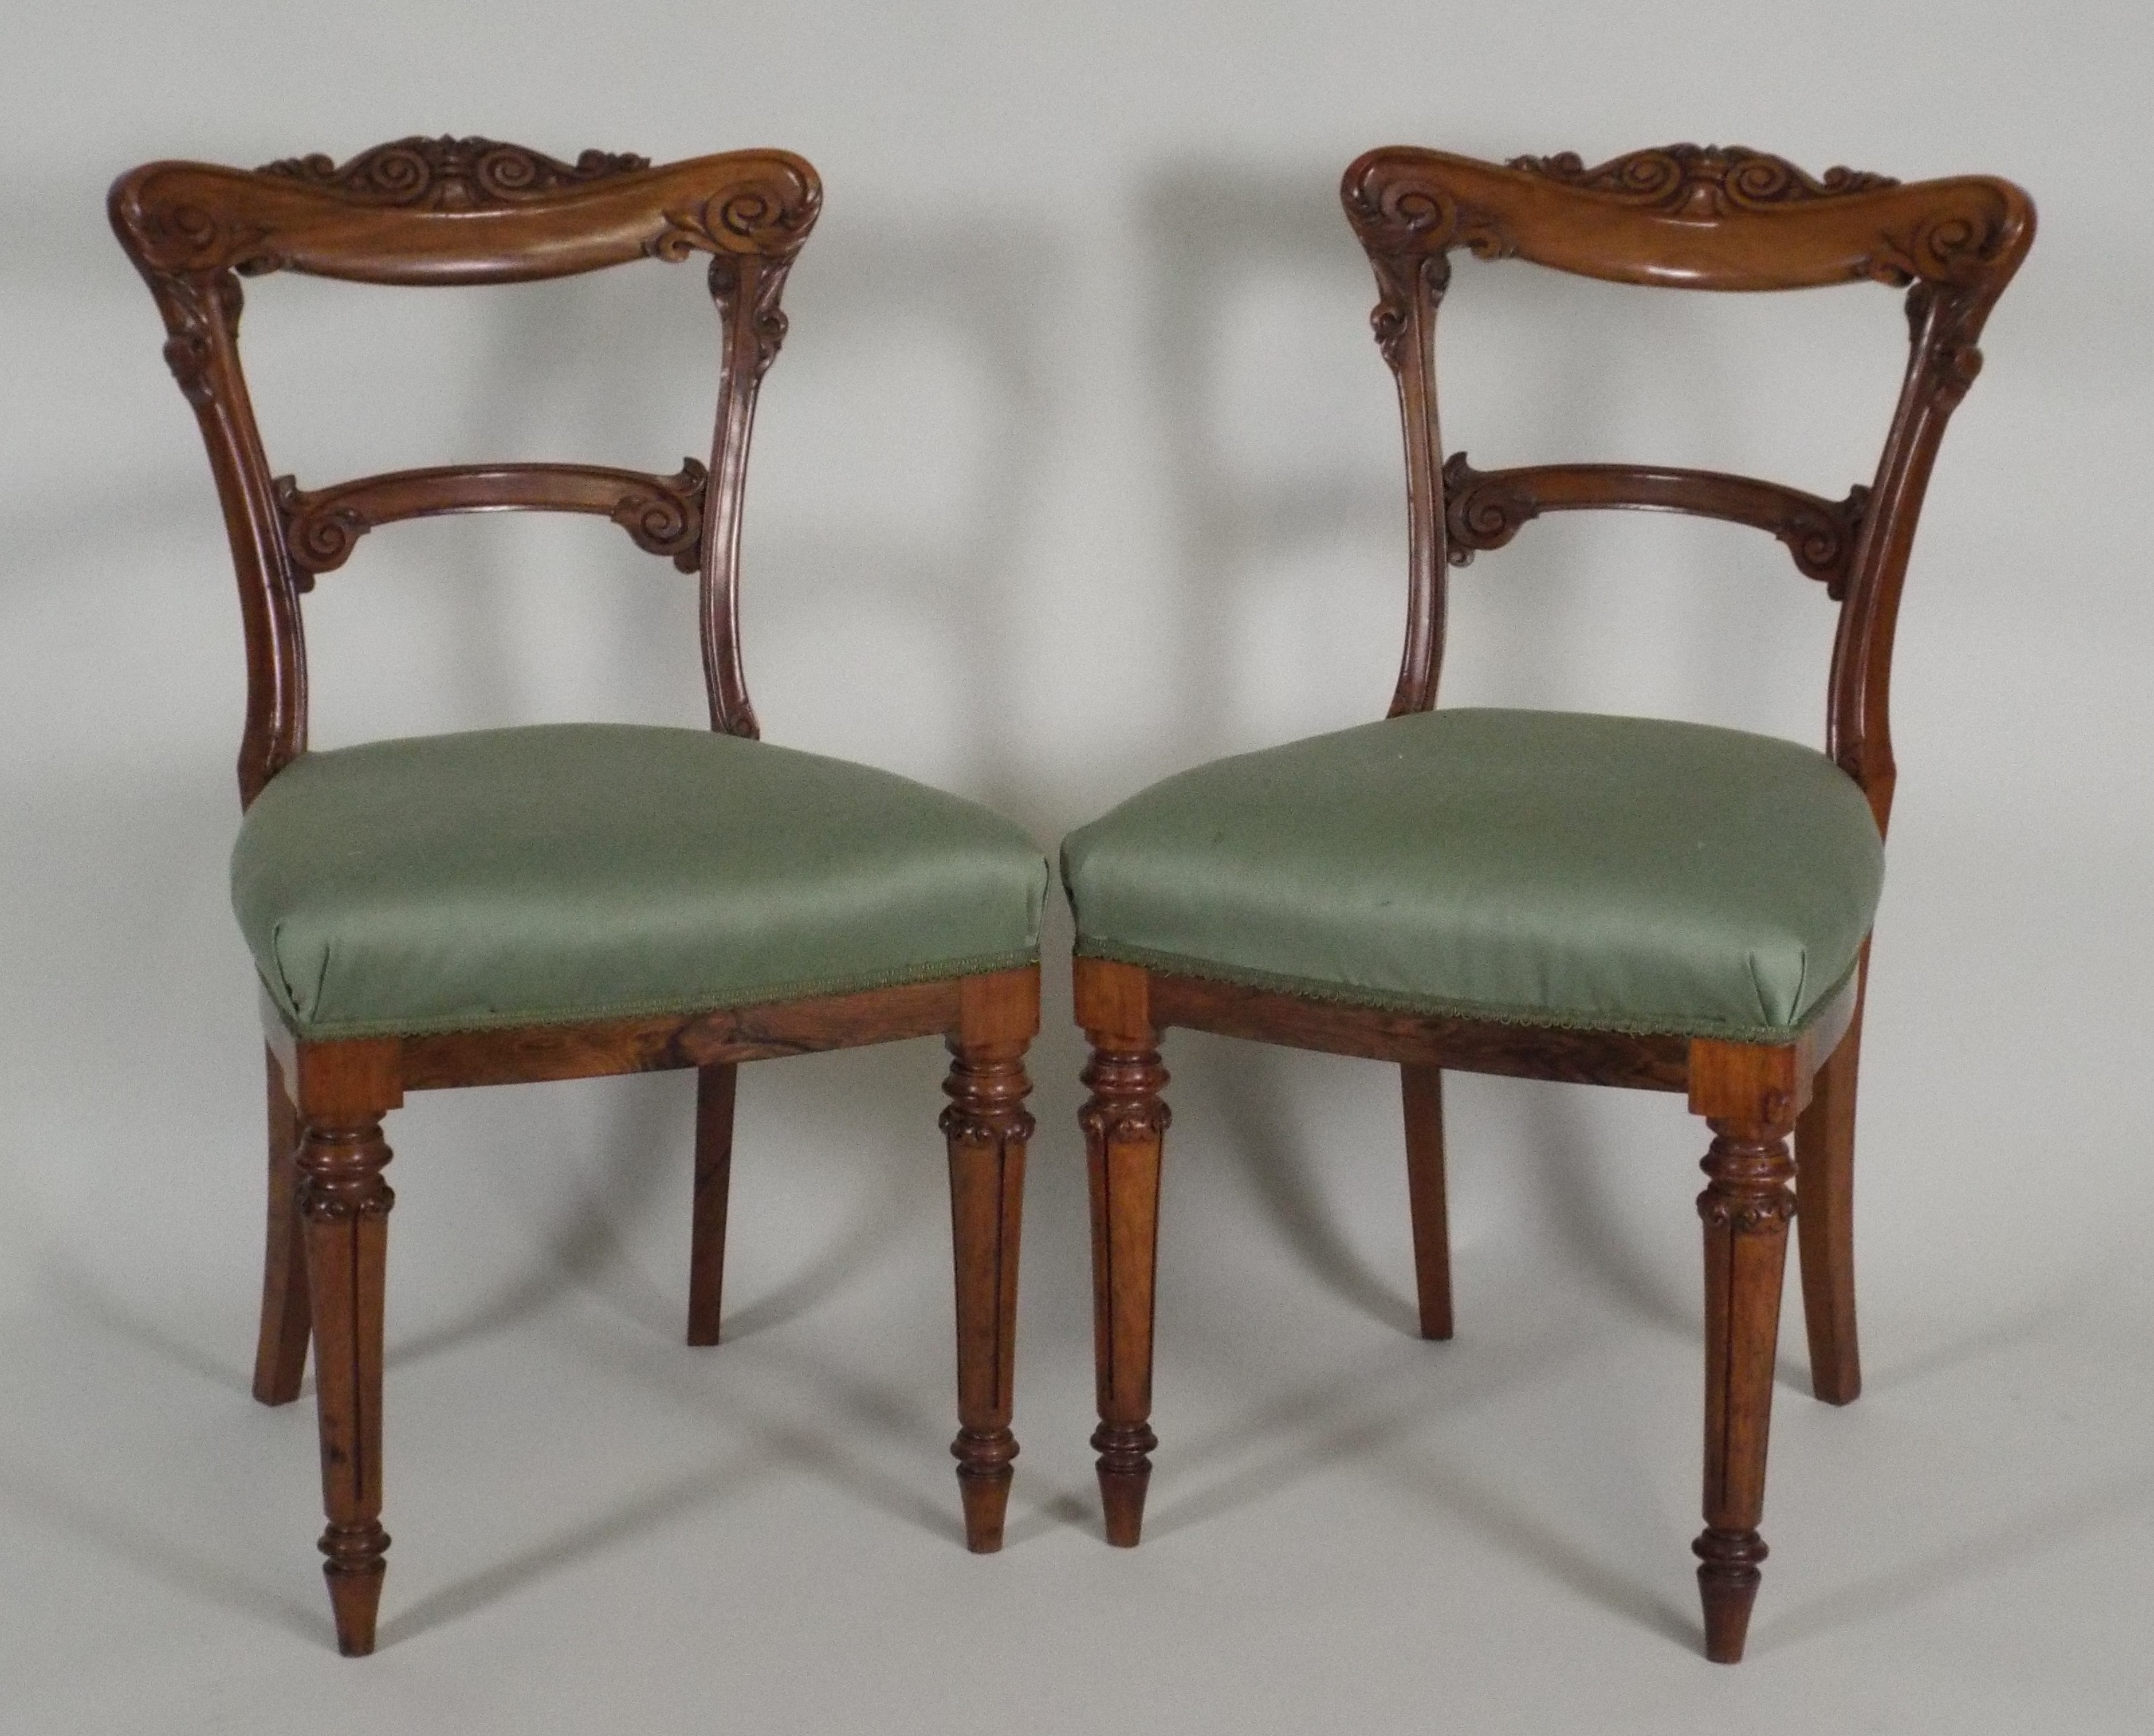 A set of six early Victorian rosewood and faux grained dining chairs, each with a scroll carved top